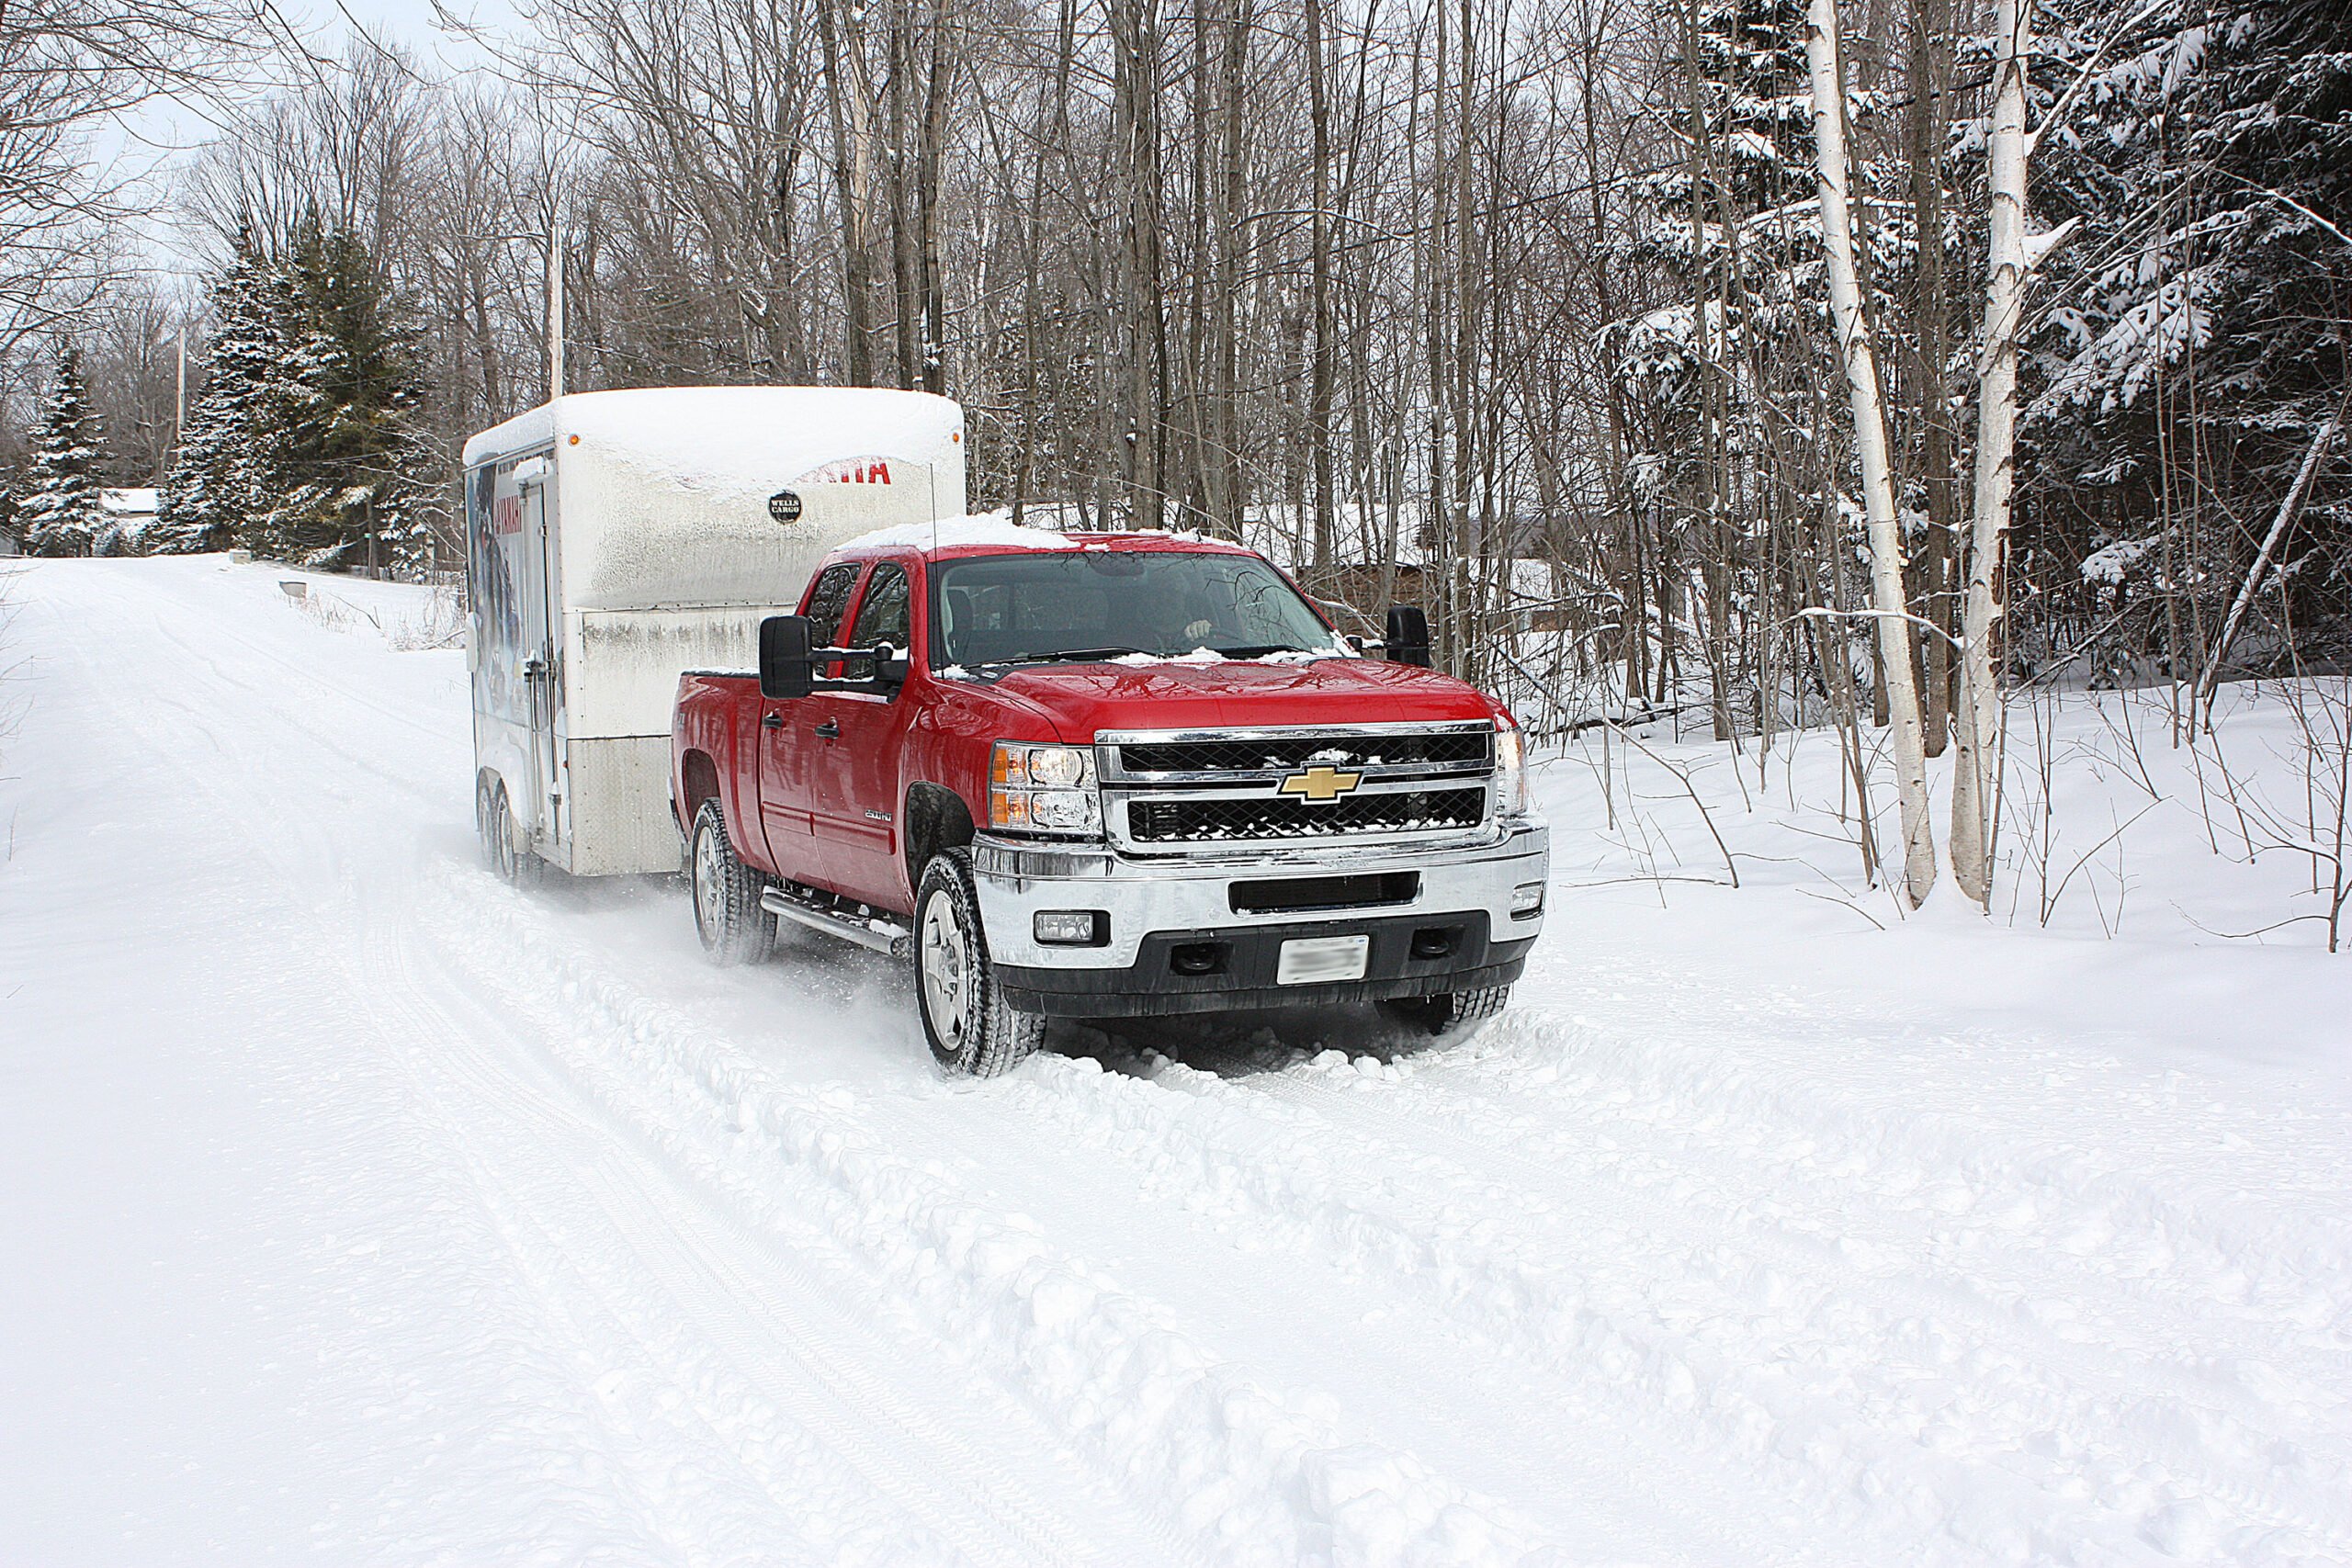 Red 2011 Silverado HD towing a Yamaha trailer in the winter